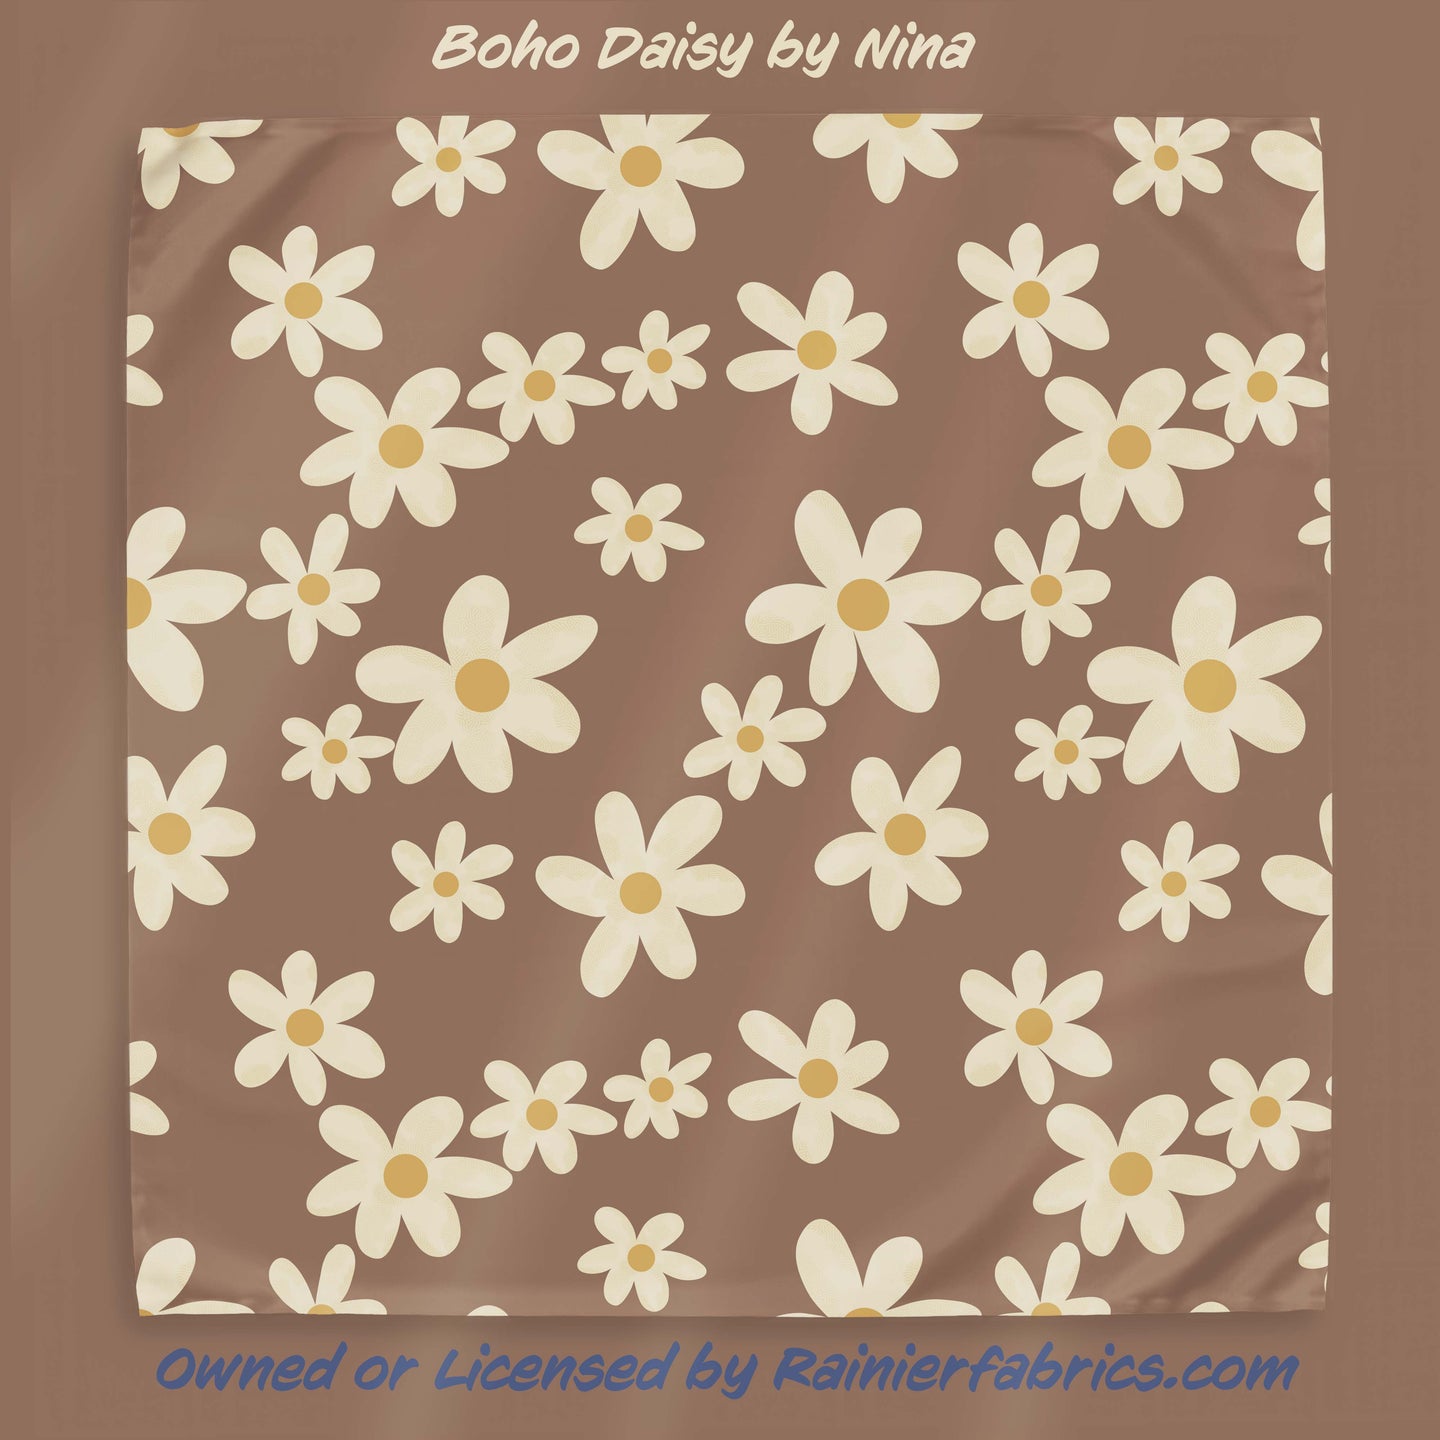 Boho Daisies by Nina - 2-5 day turnaround - Order by 1/2 yard; Description of bases below